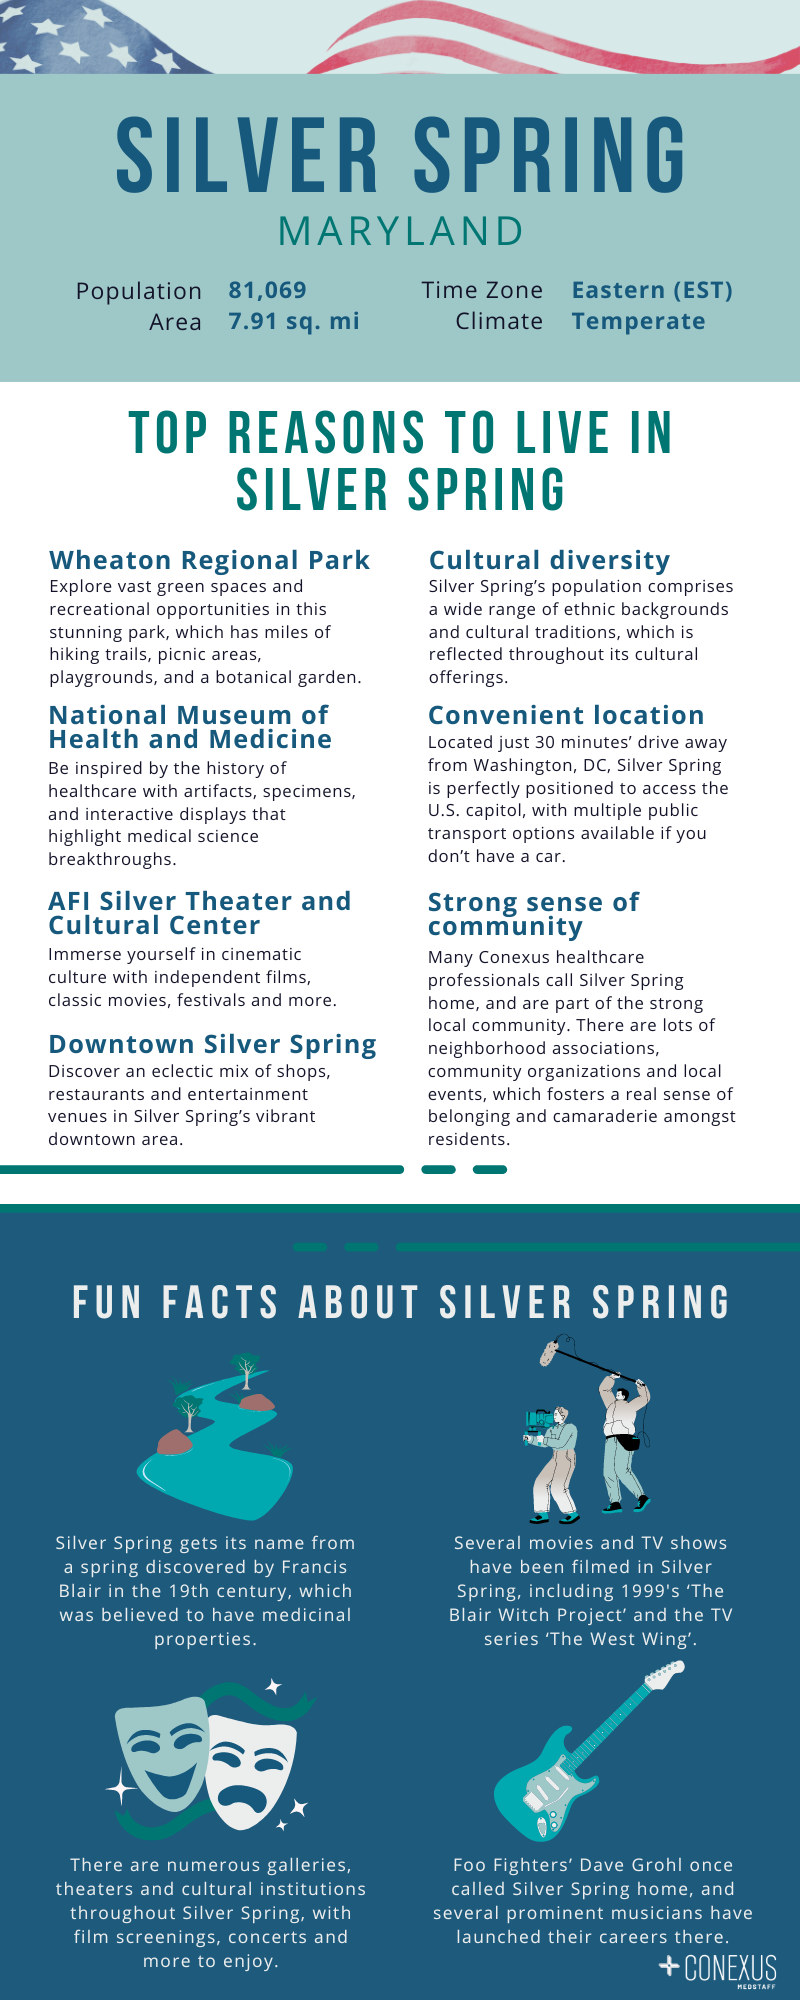 Why Silver Spring is a popular location for international healthcare professionals in the USA